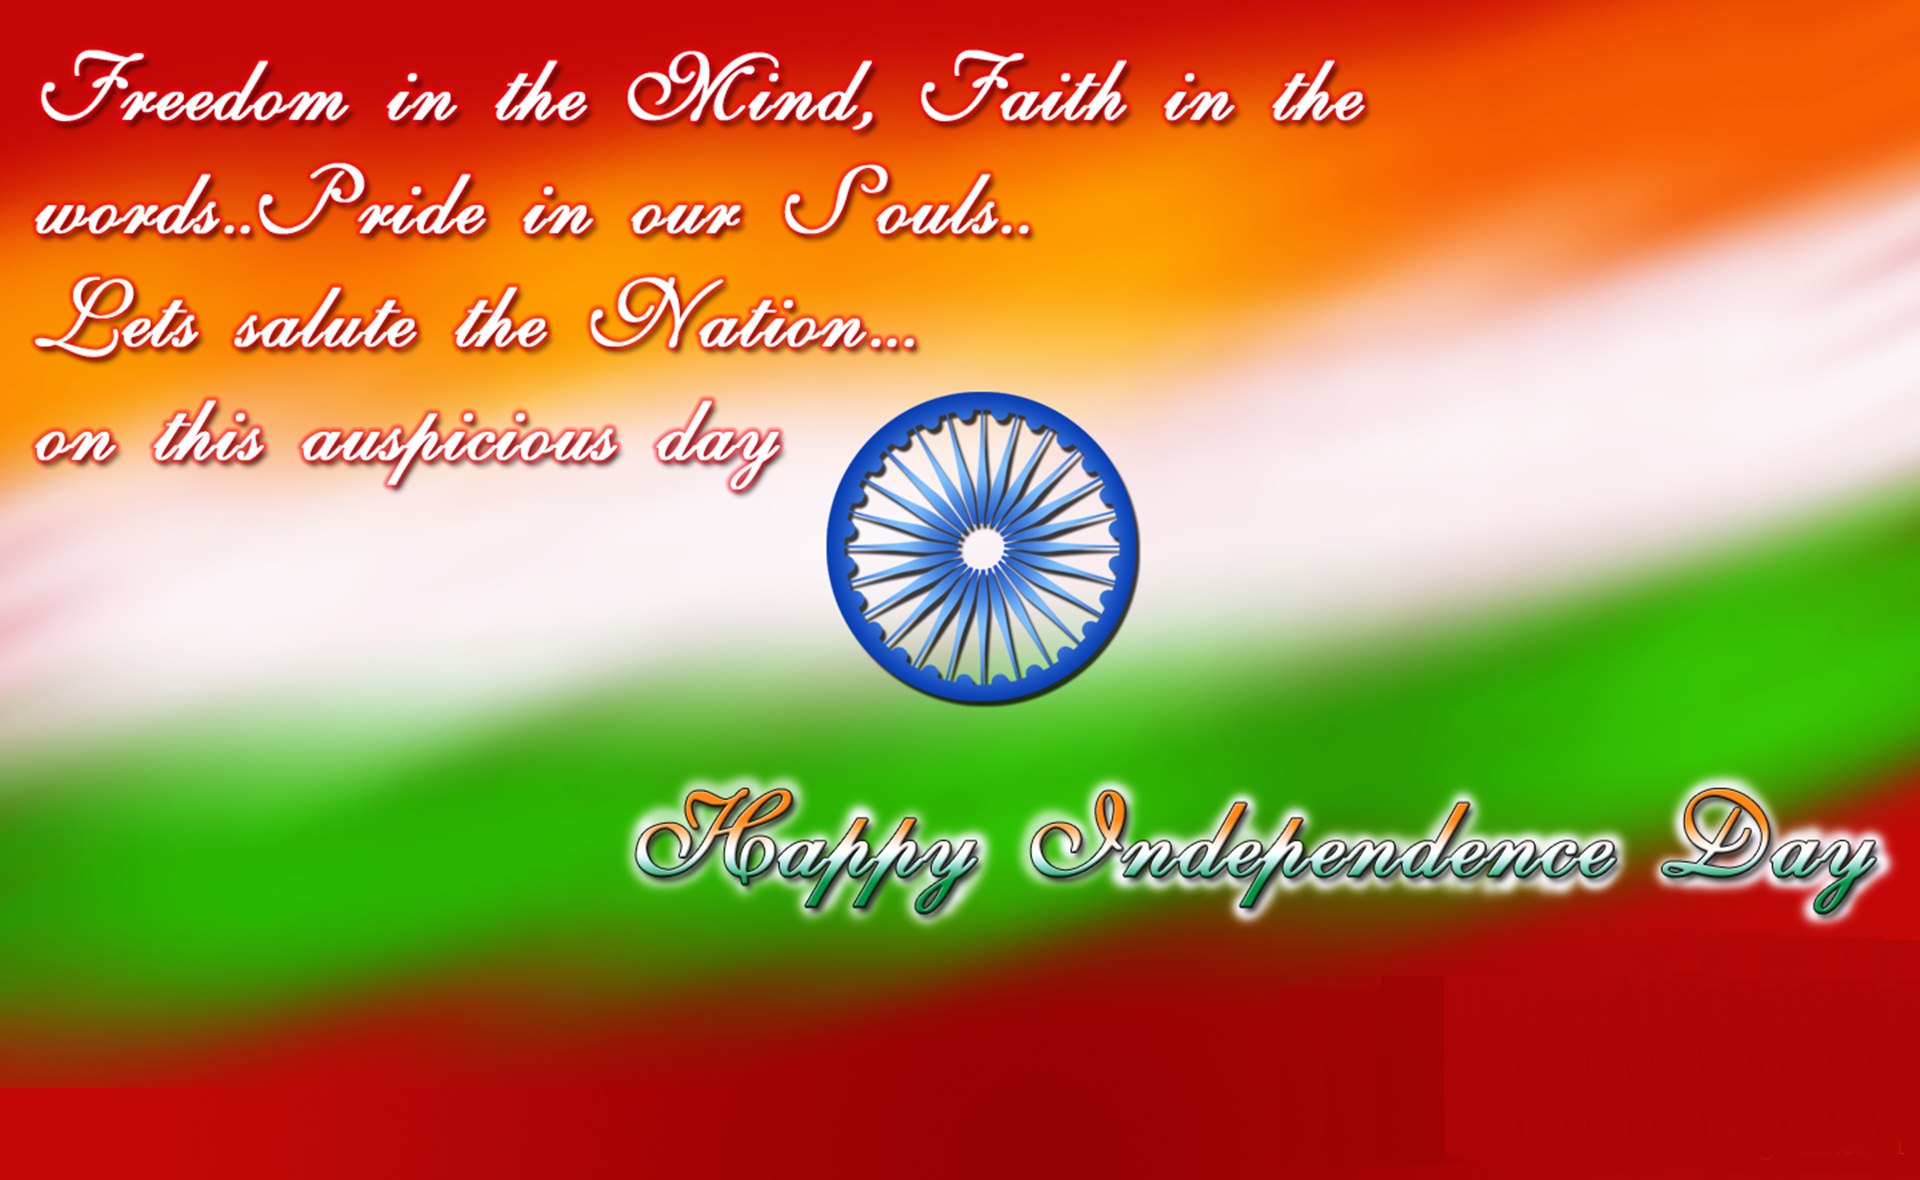 15 August Independence Day Quotes Wallpaper - Quotations On Independence Day - HD Wallpaper 